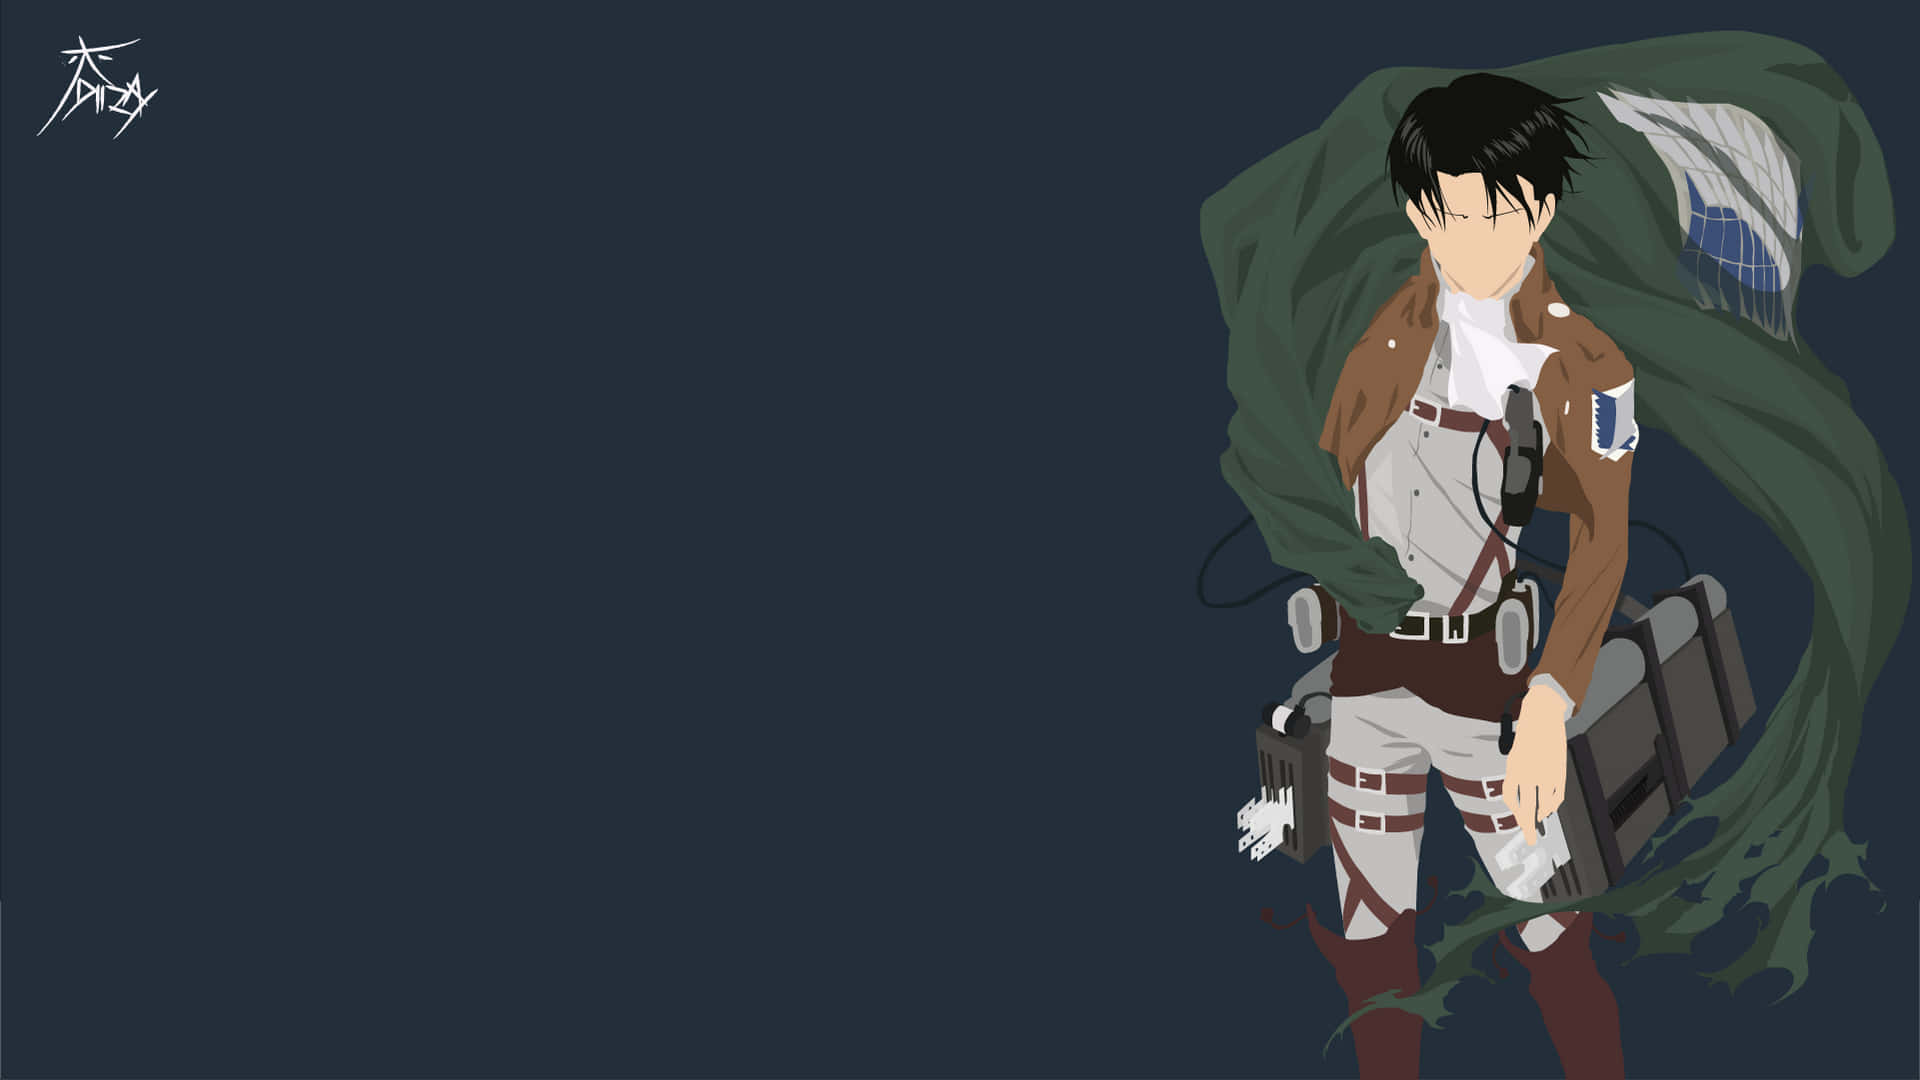 "Levi Ackerman, the hero of humanity in Attack on Titan" Wallpaper